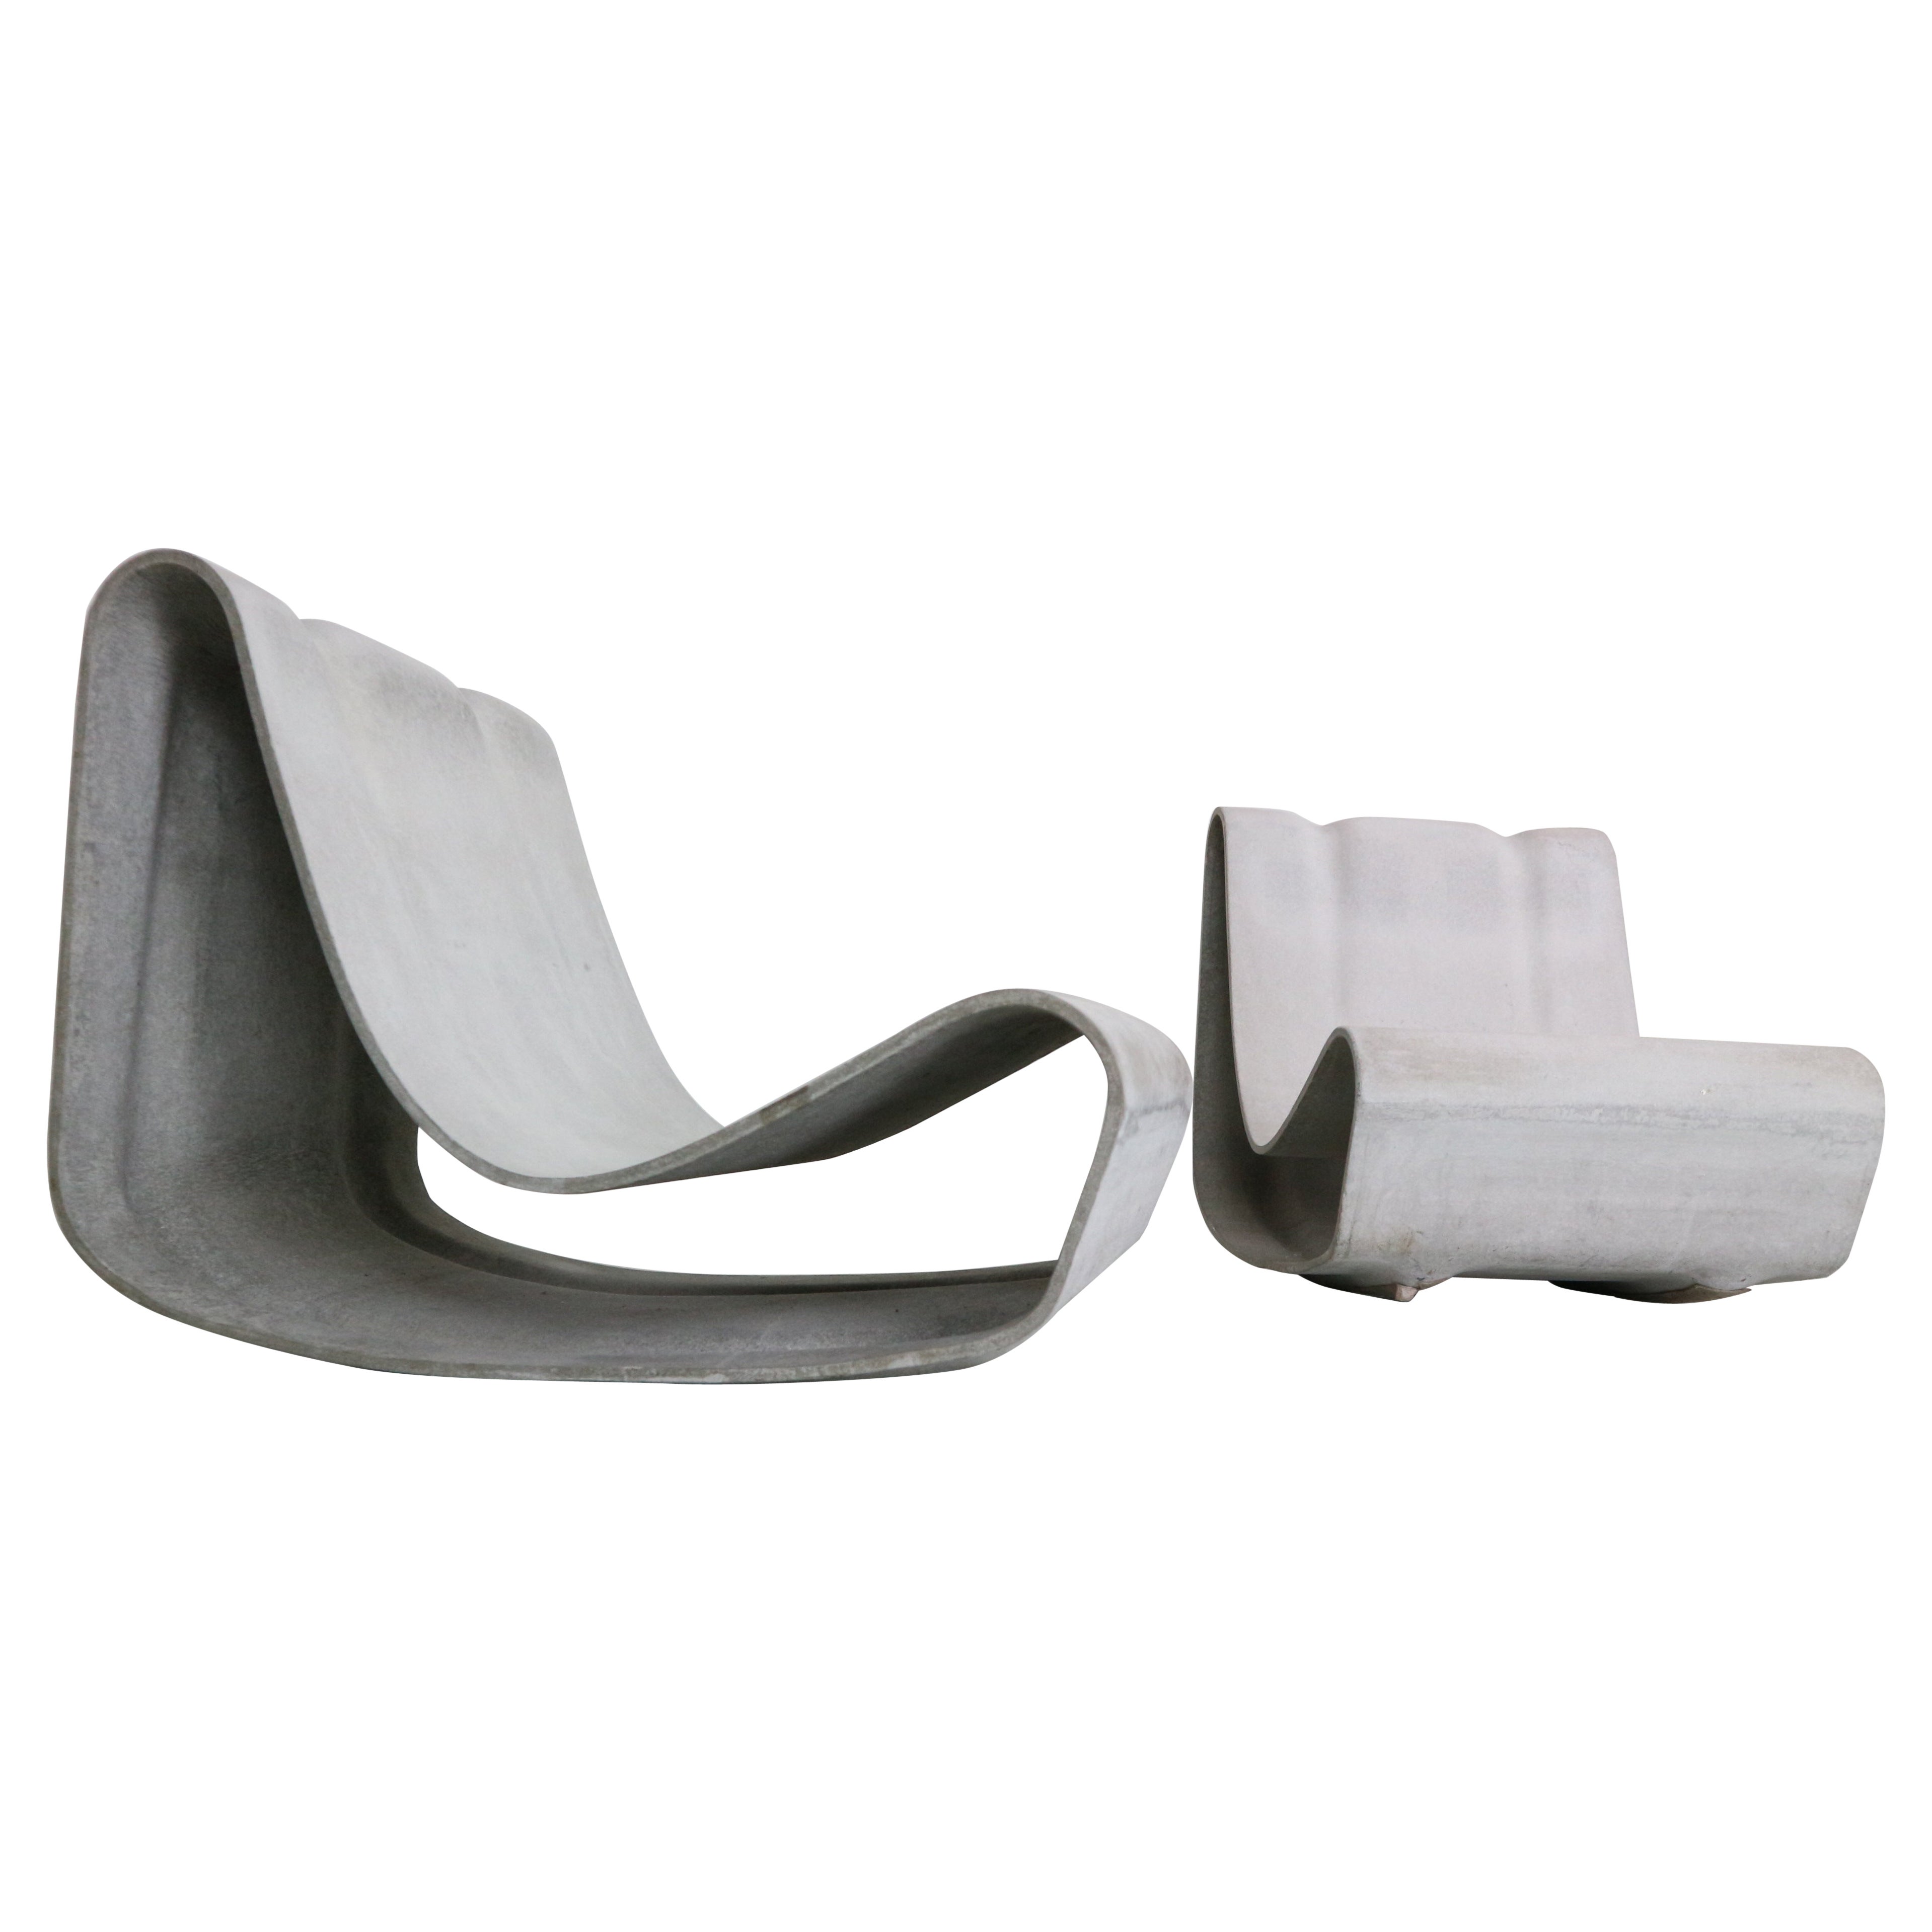 Willy Guhl Set of 2 "Loop" Chairs for Eternit, Switzerland